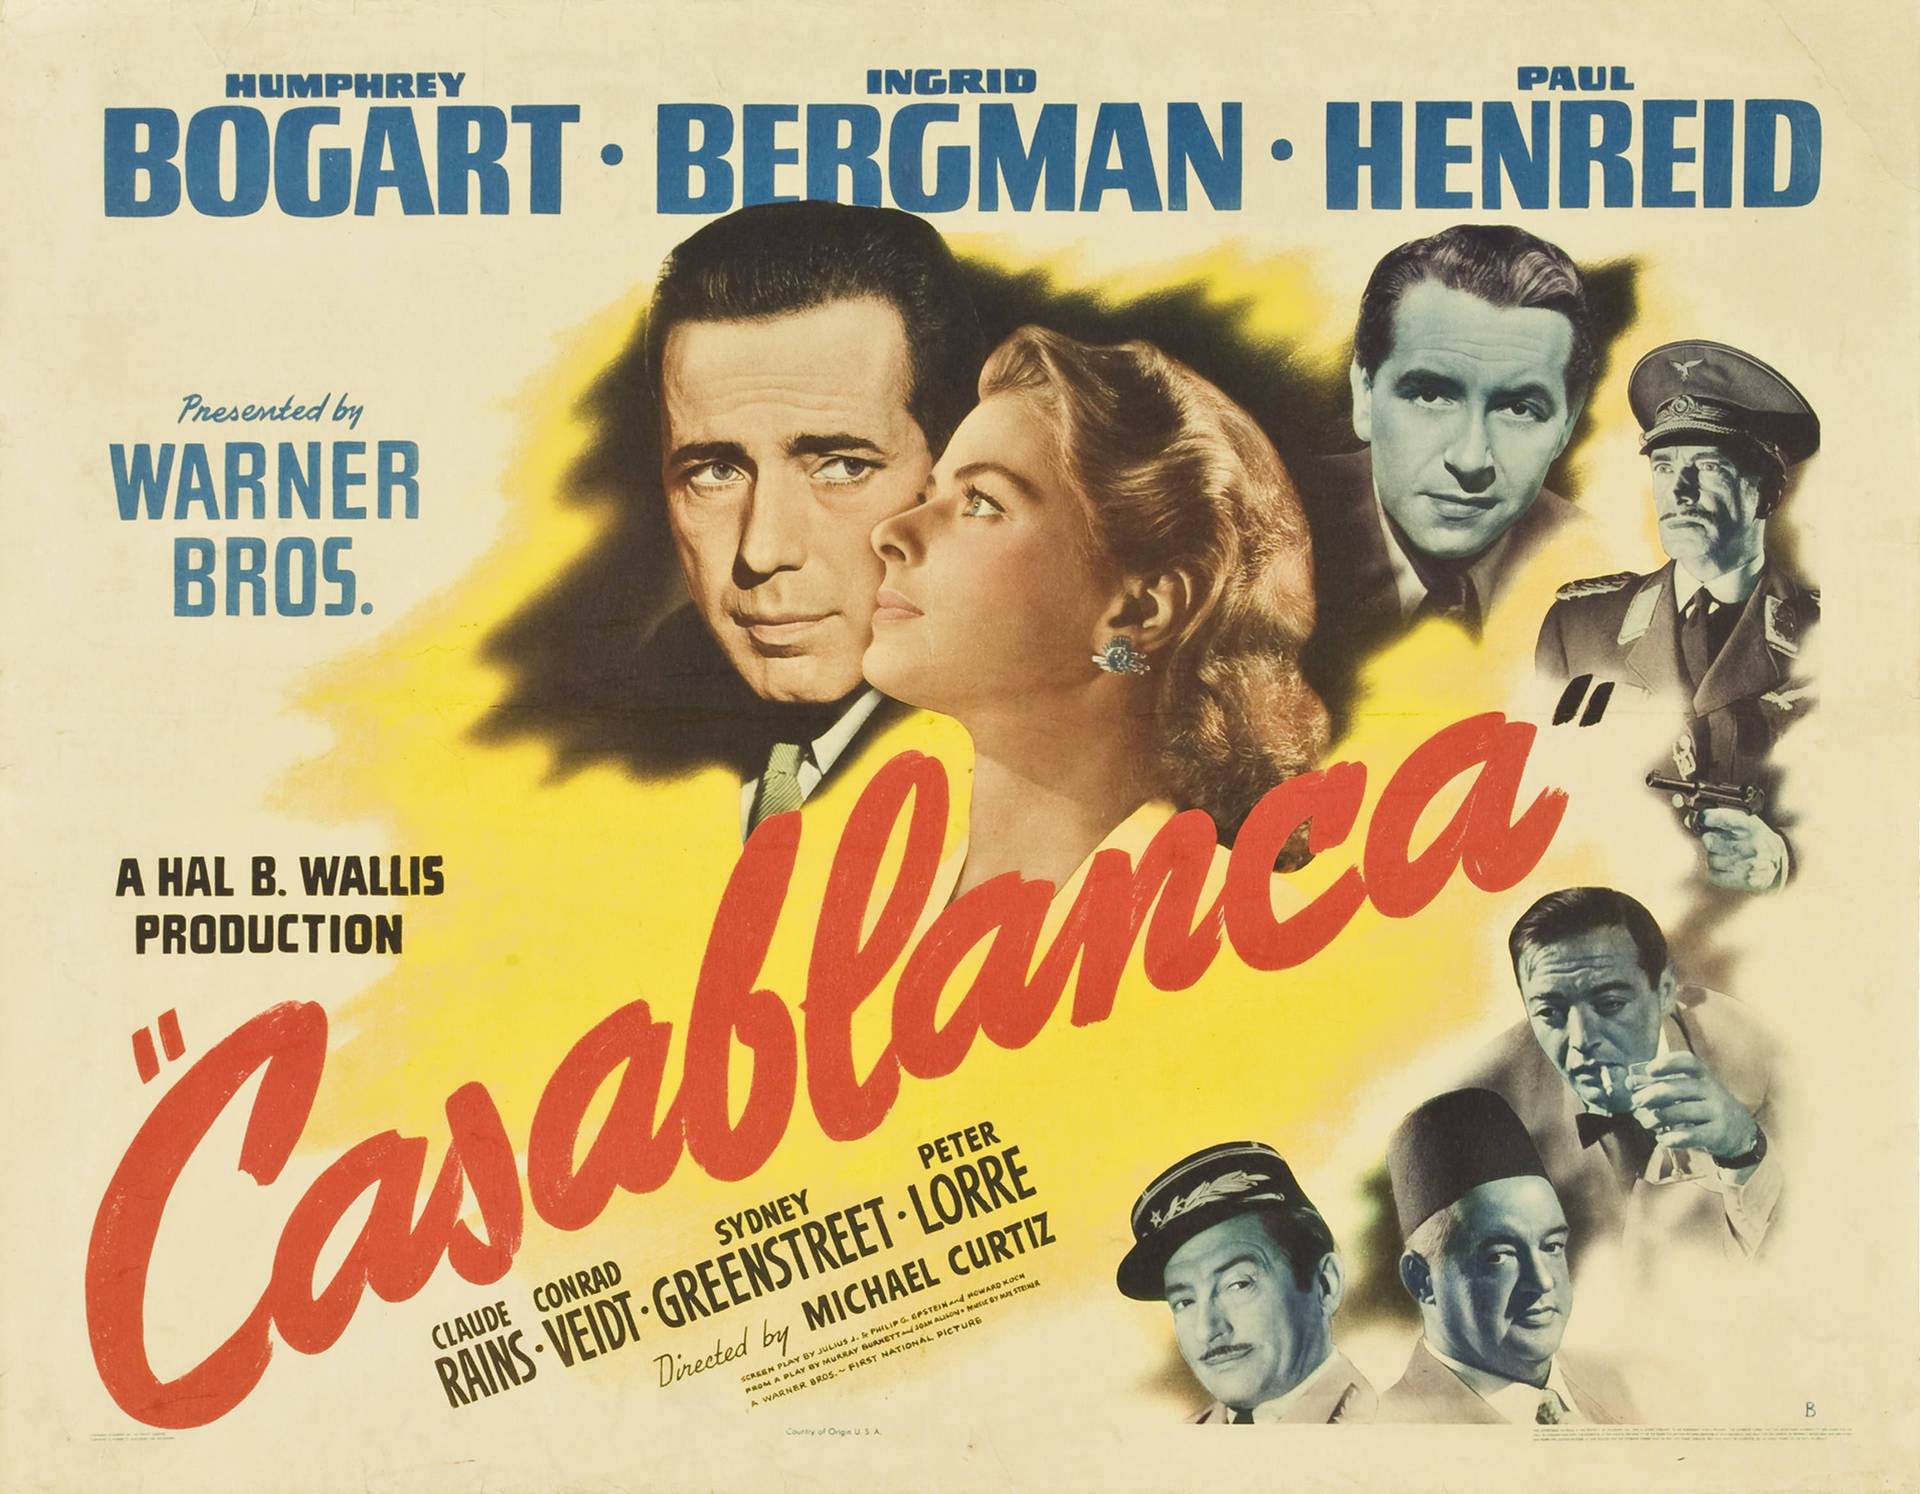 Renowned Casablanca Movie Poster Background